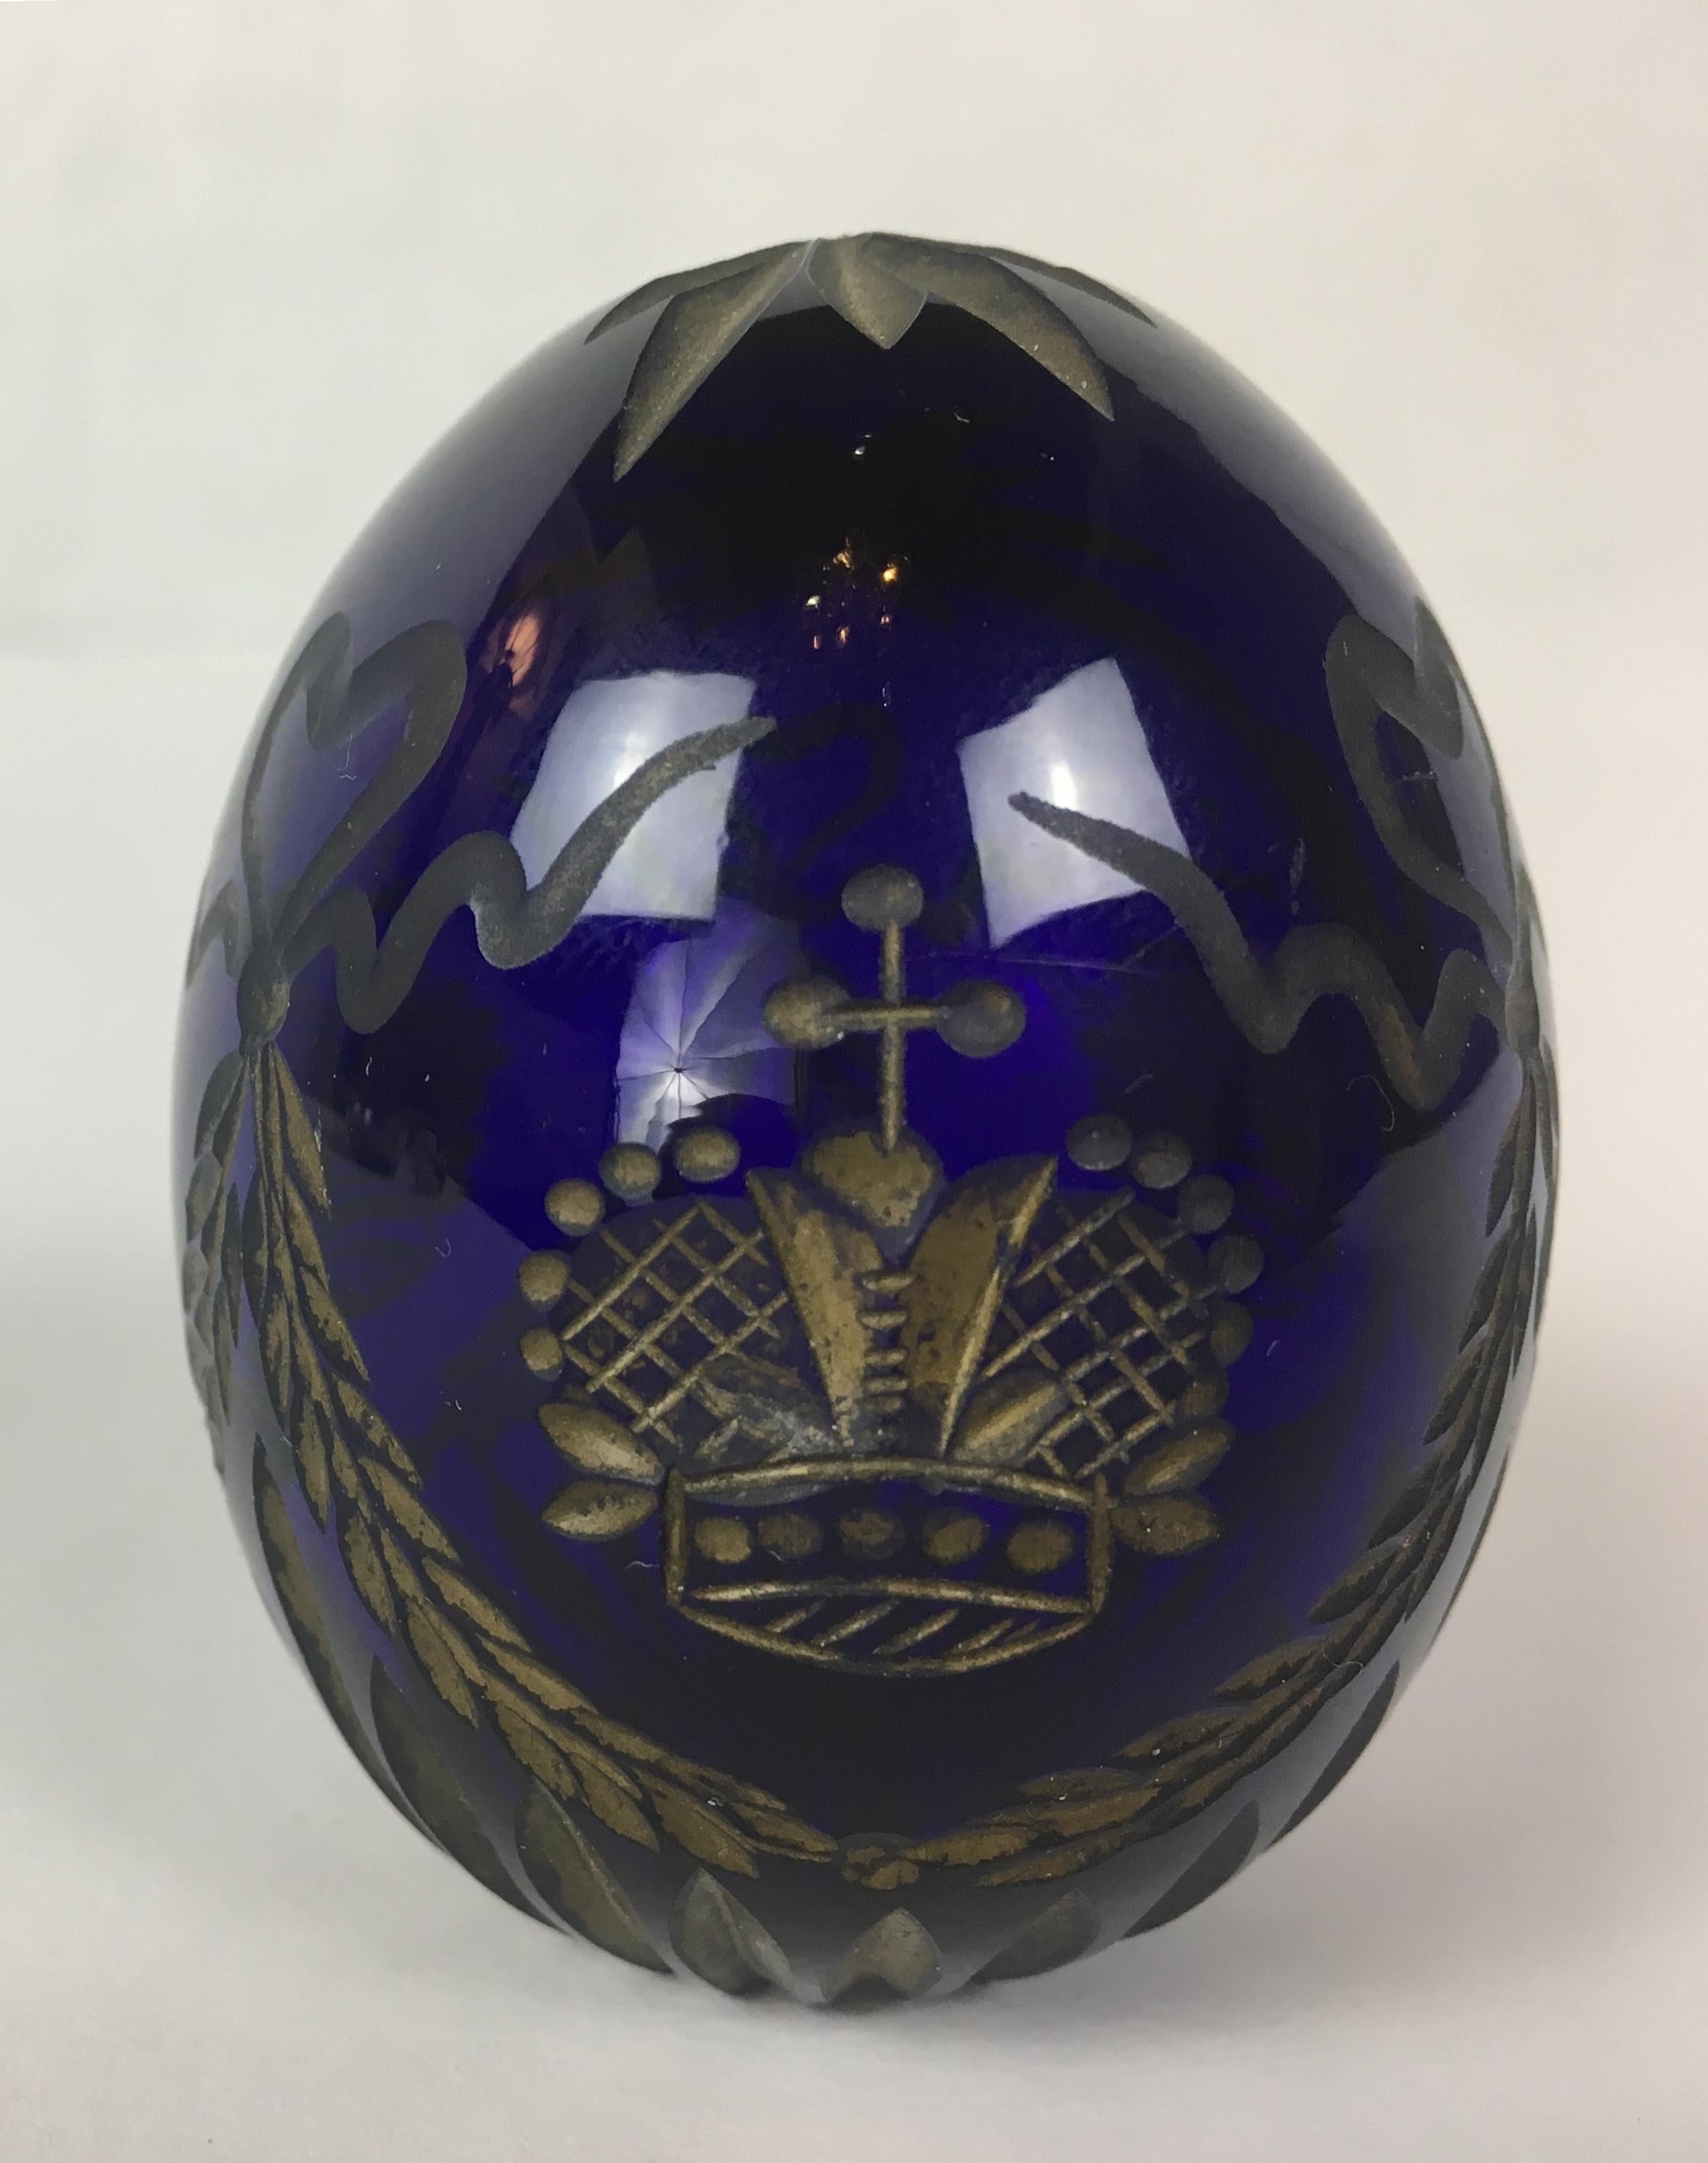 Vintage Faberge style glass egg with etched royal crown. Reminiscent of eggs from St. Petersburg.
Measures: 1.75